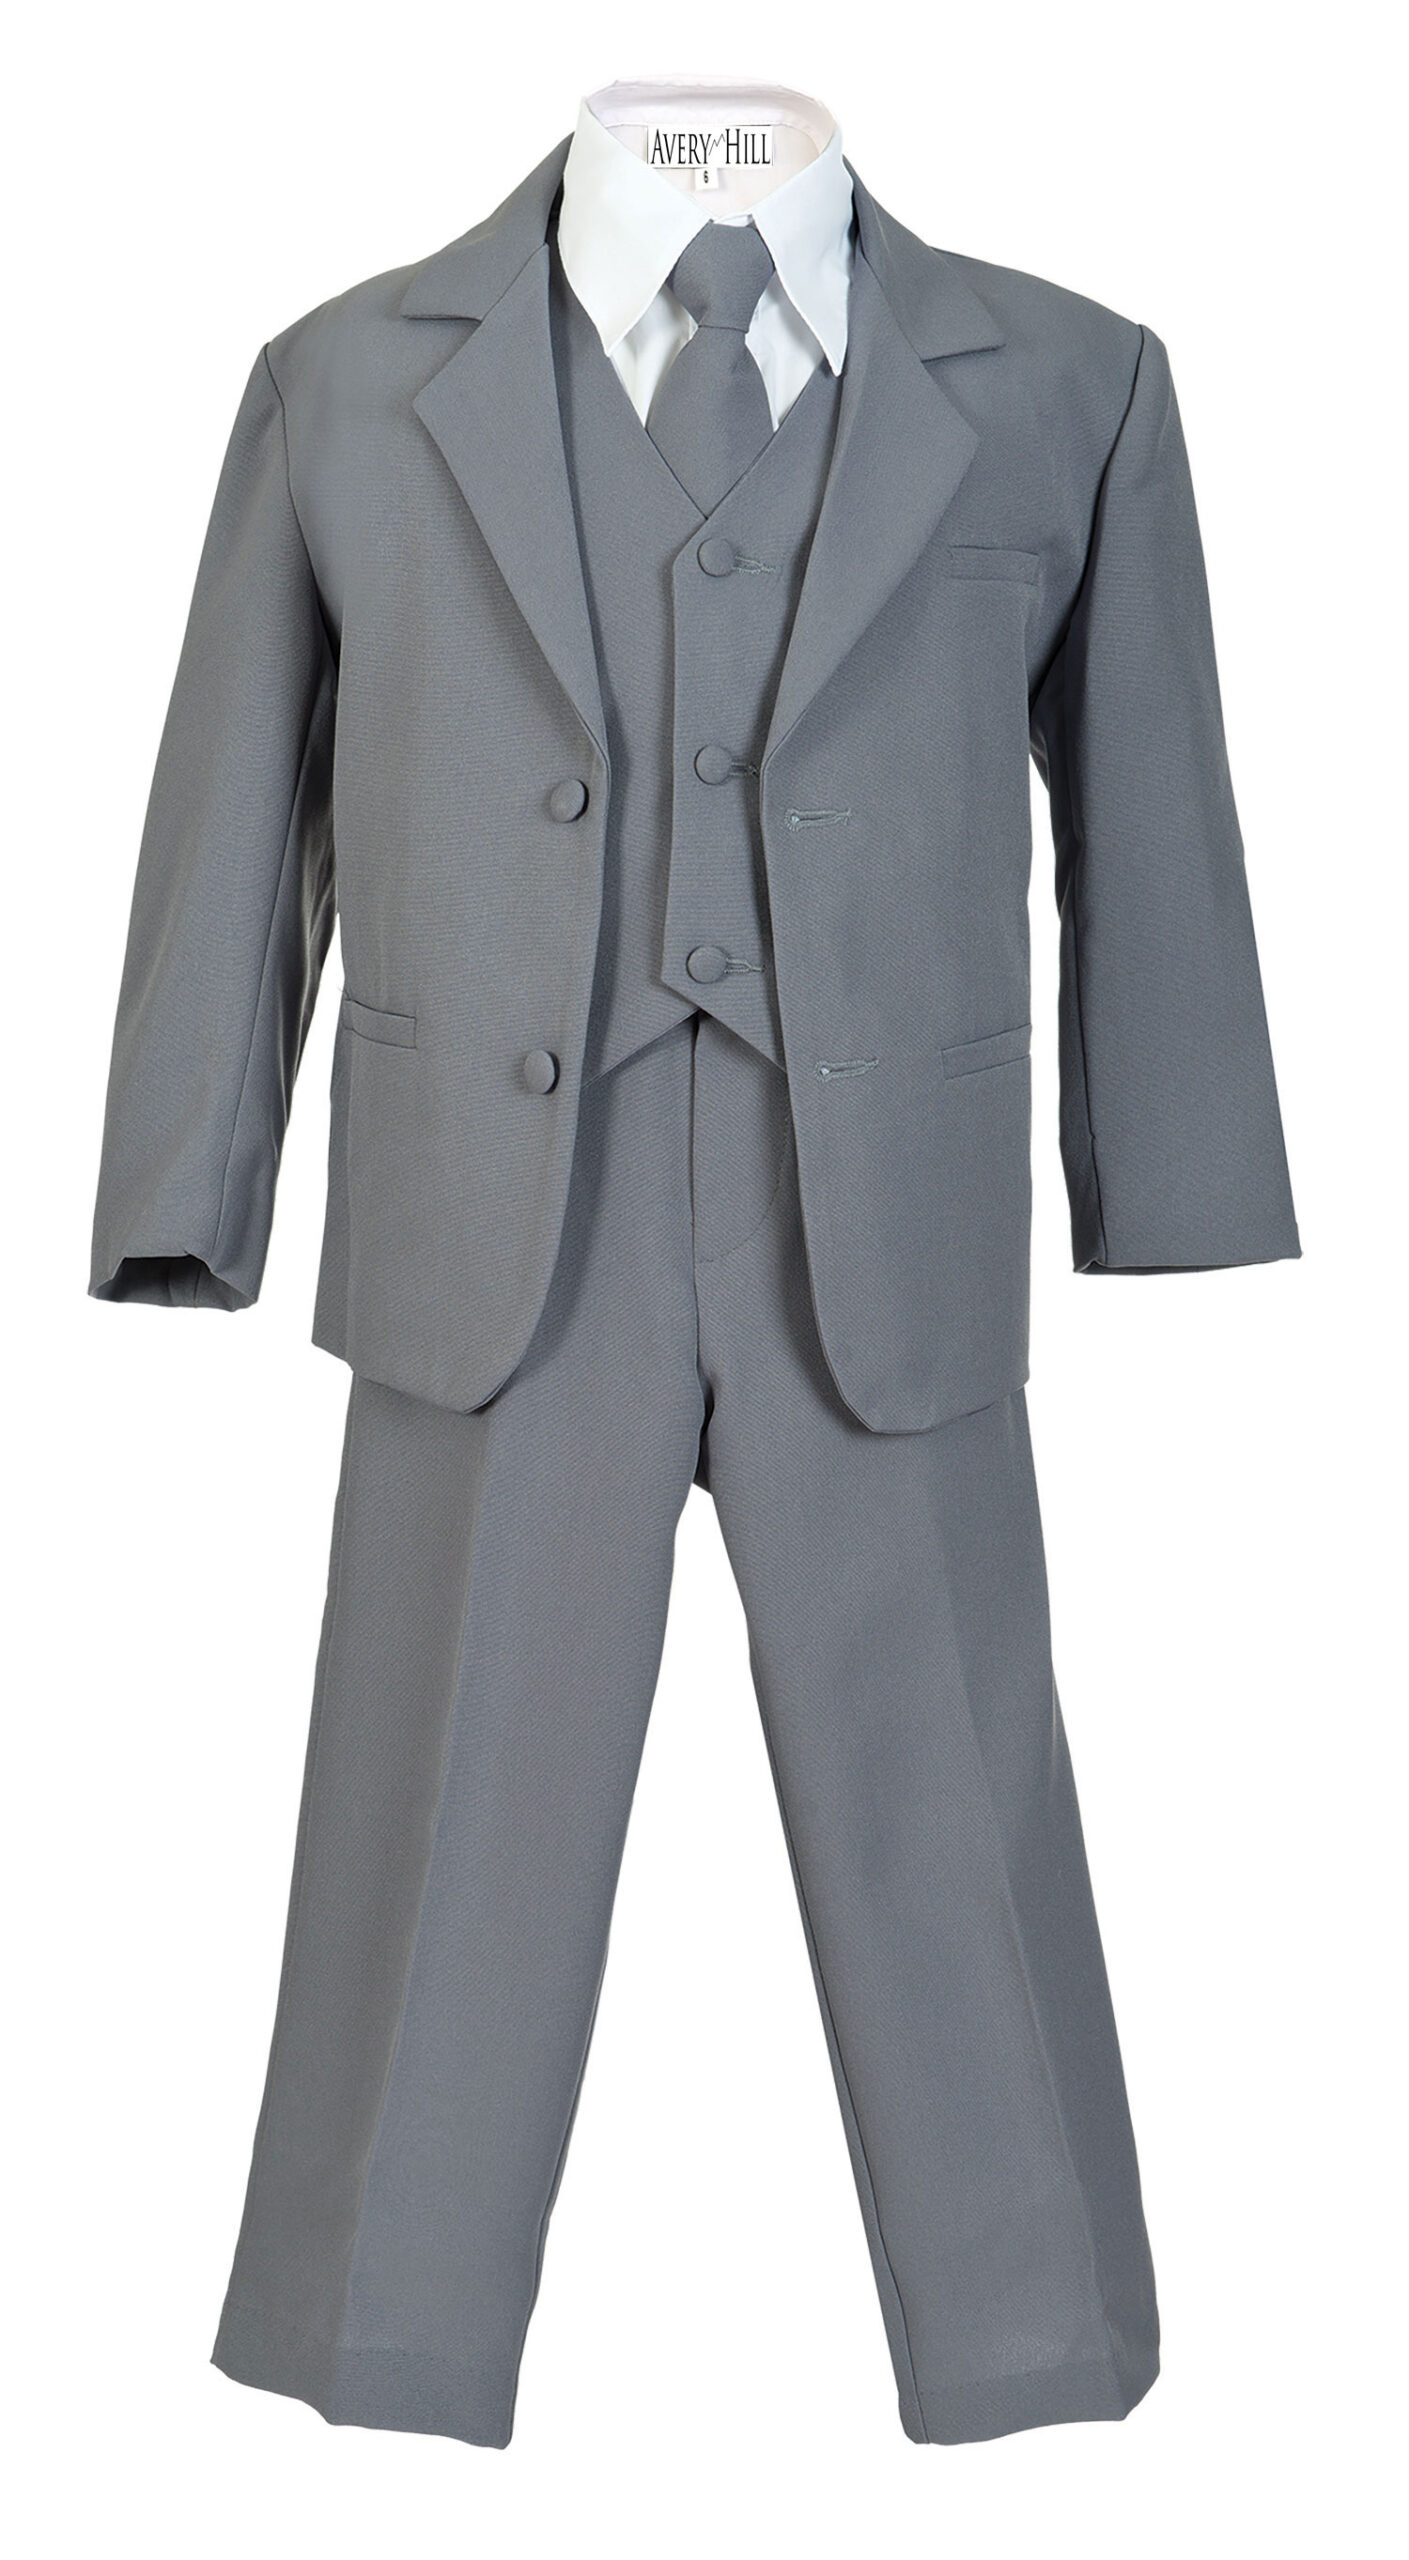 Avery Hill Boys Formal 5 Piece Suit with Shirt and Vest Slate Gray - M